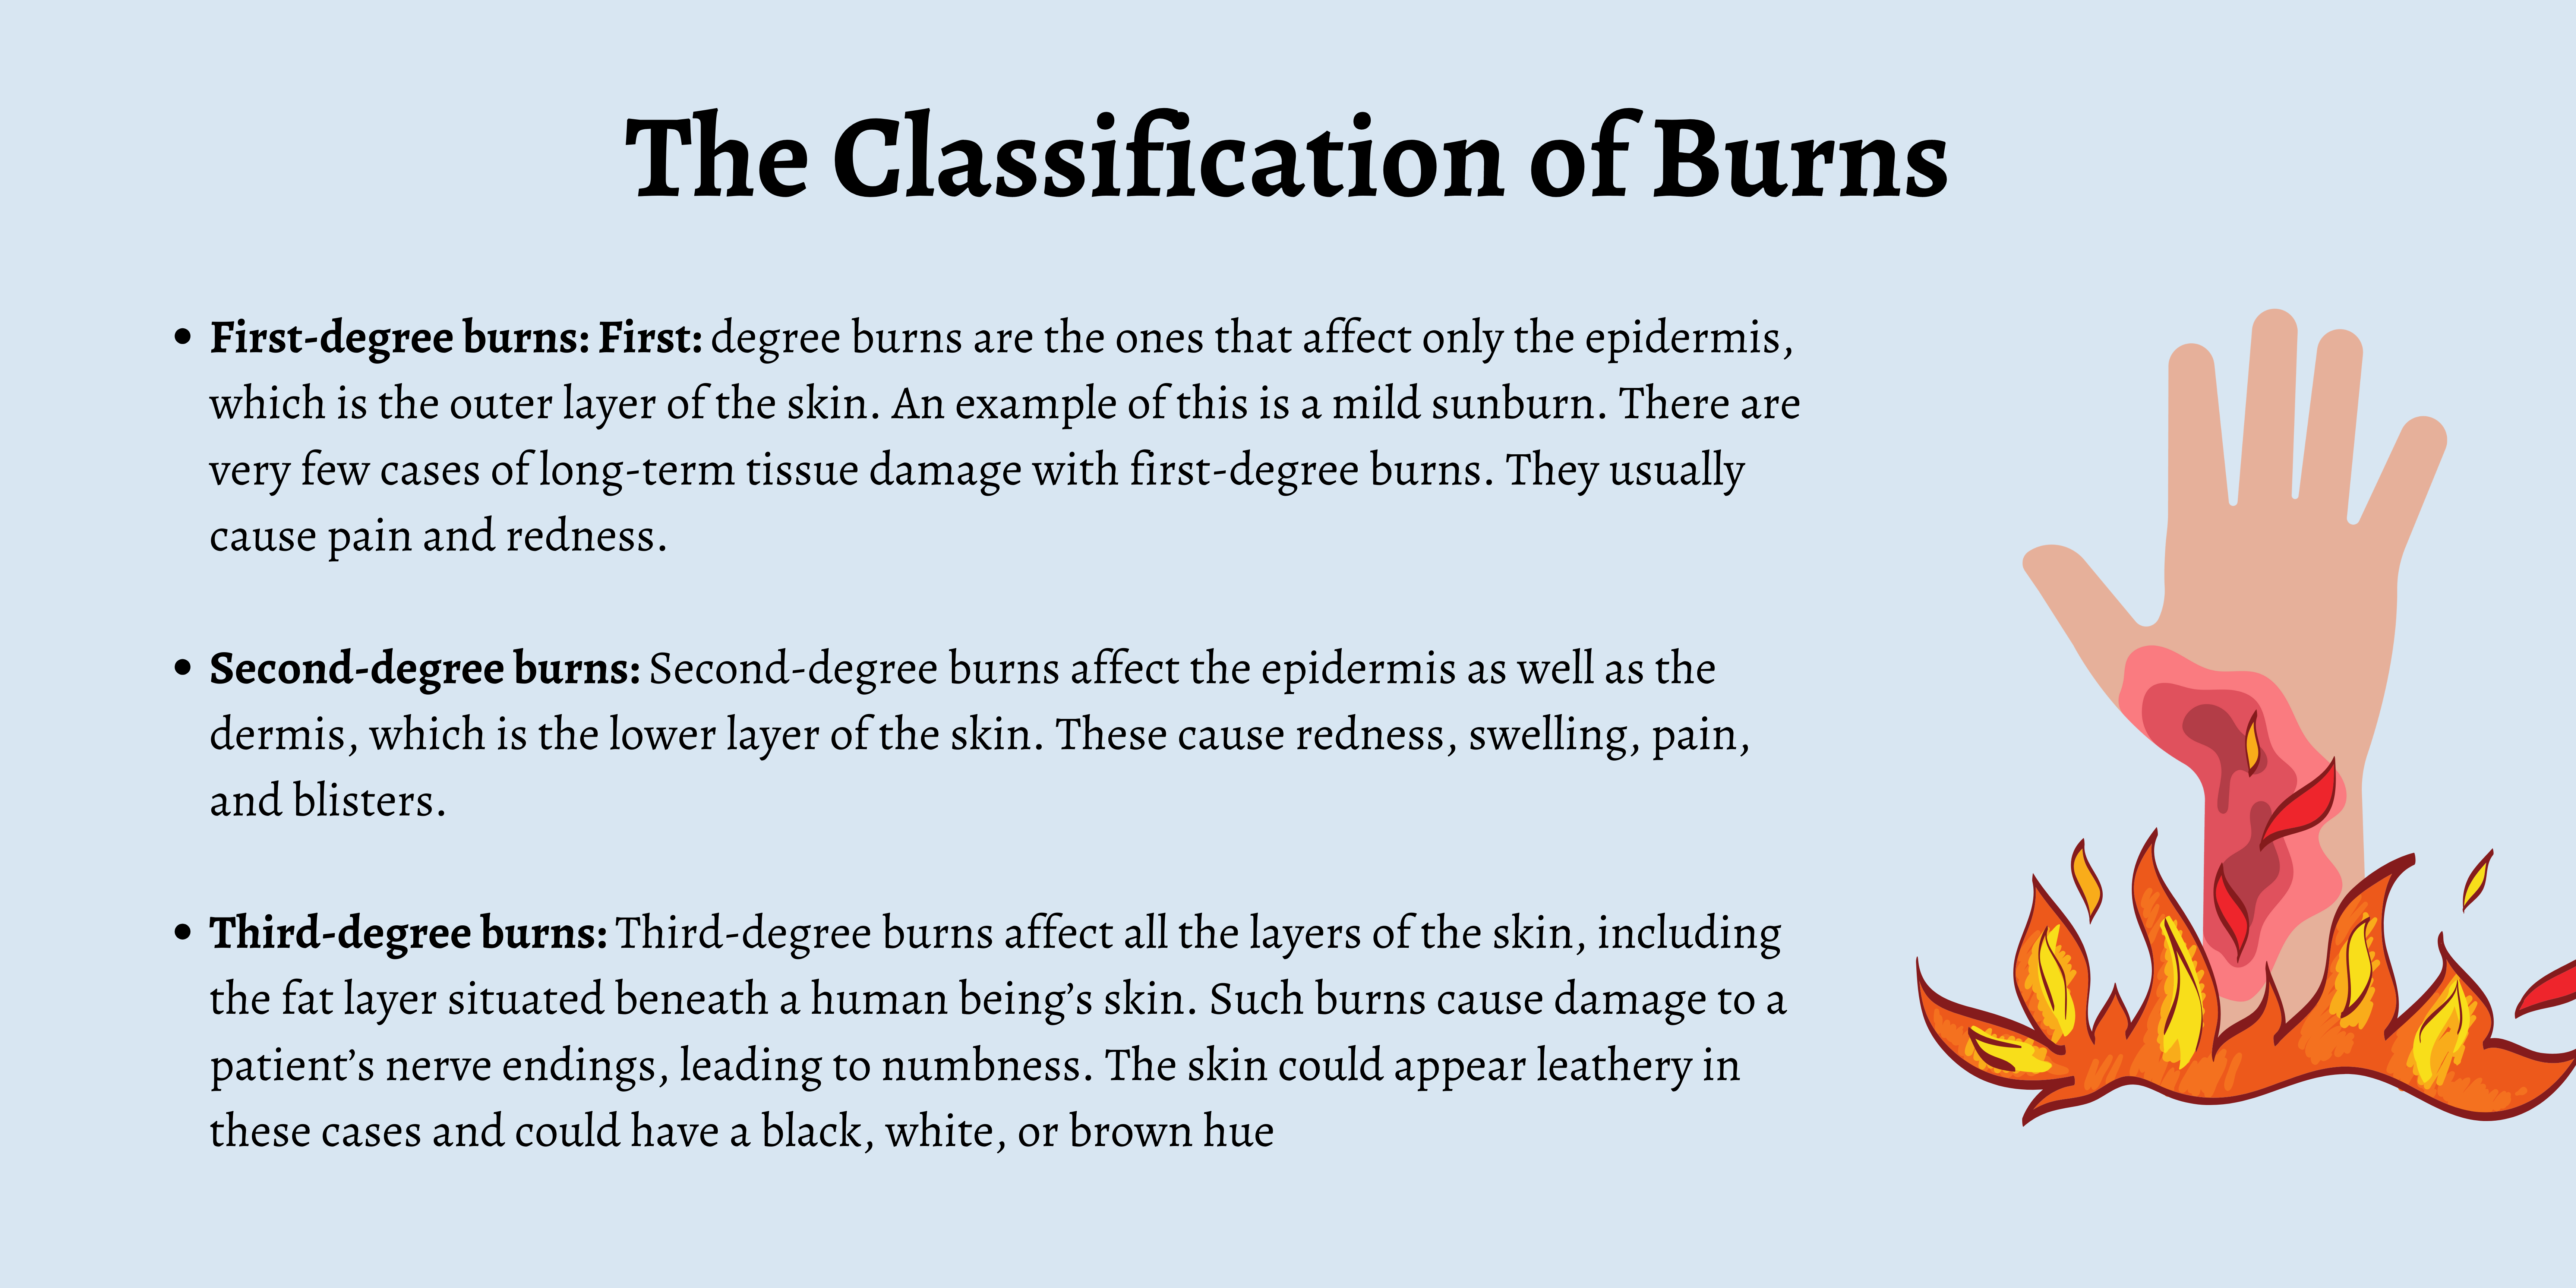 What Are The Different Types of Burn Injuries?